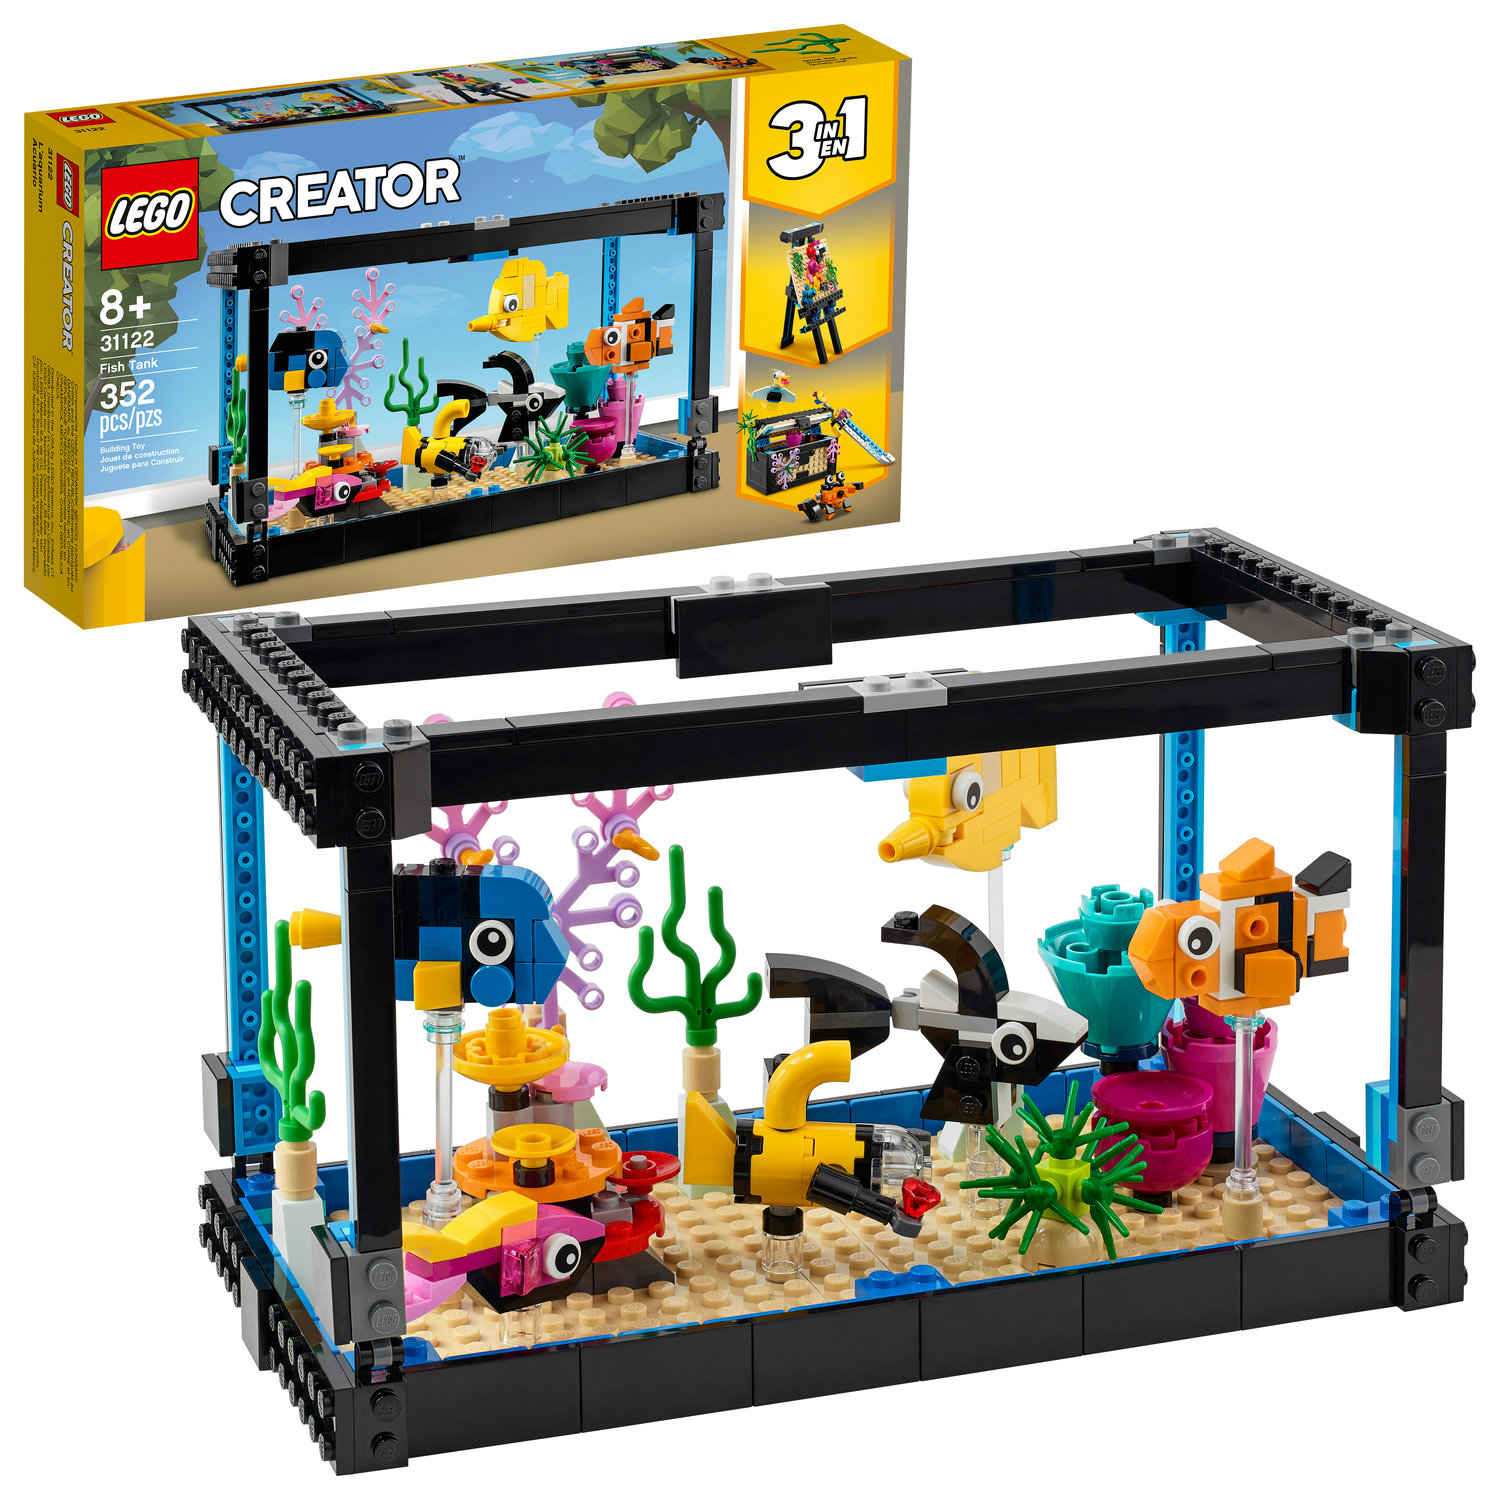 LEGO Creator 3in1 Fish Tank 31122 BuildingToy; Great Gift for Kids (352 Pieces) - image 1 of 11